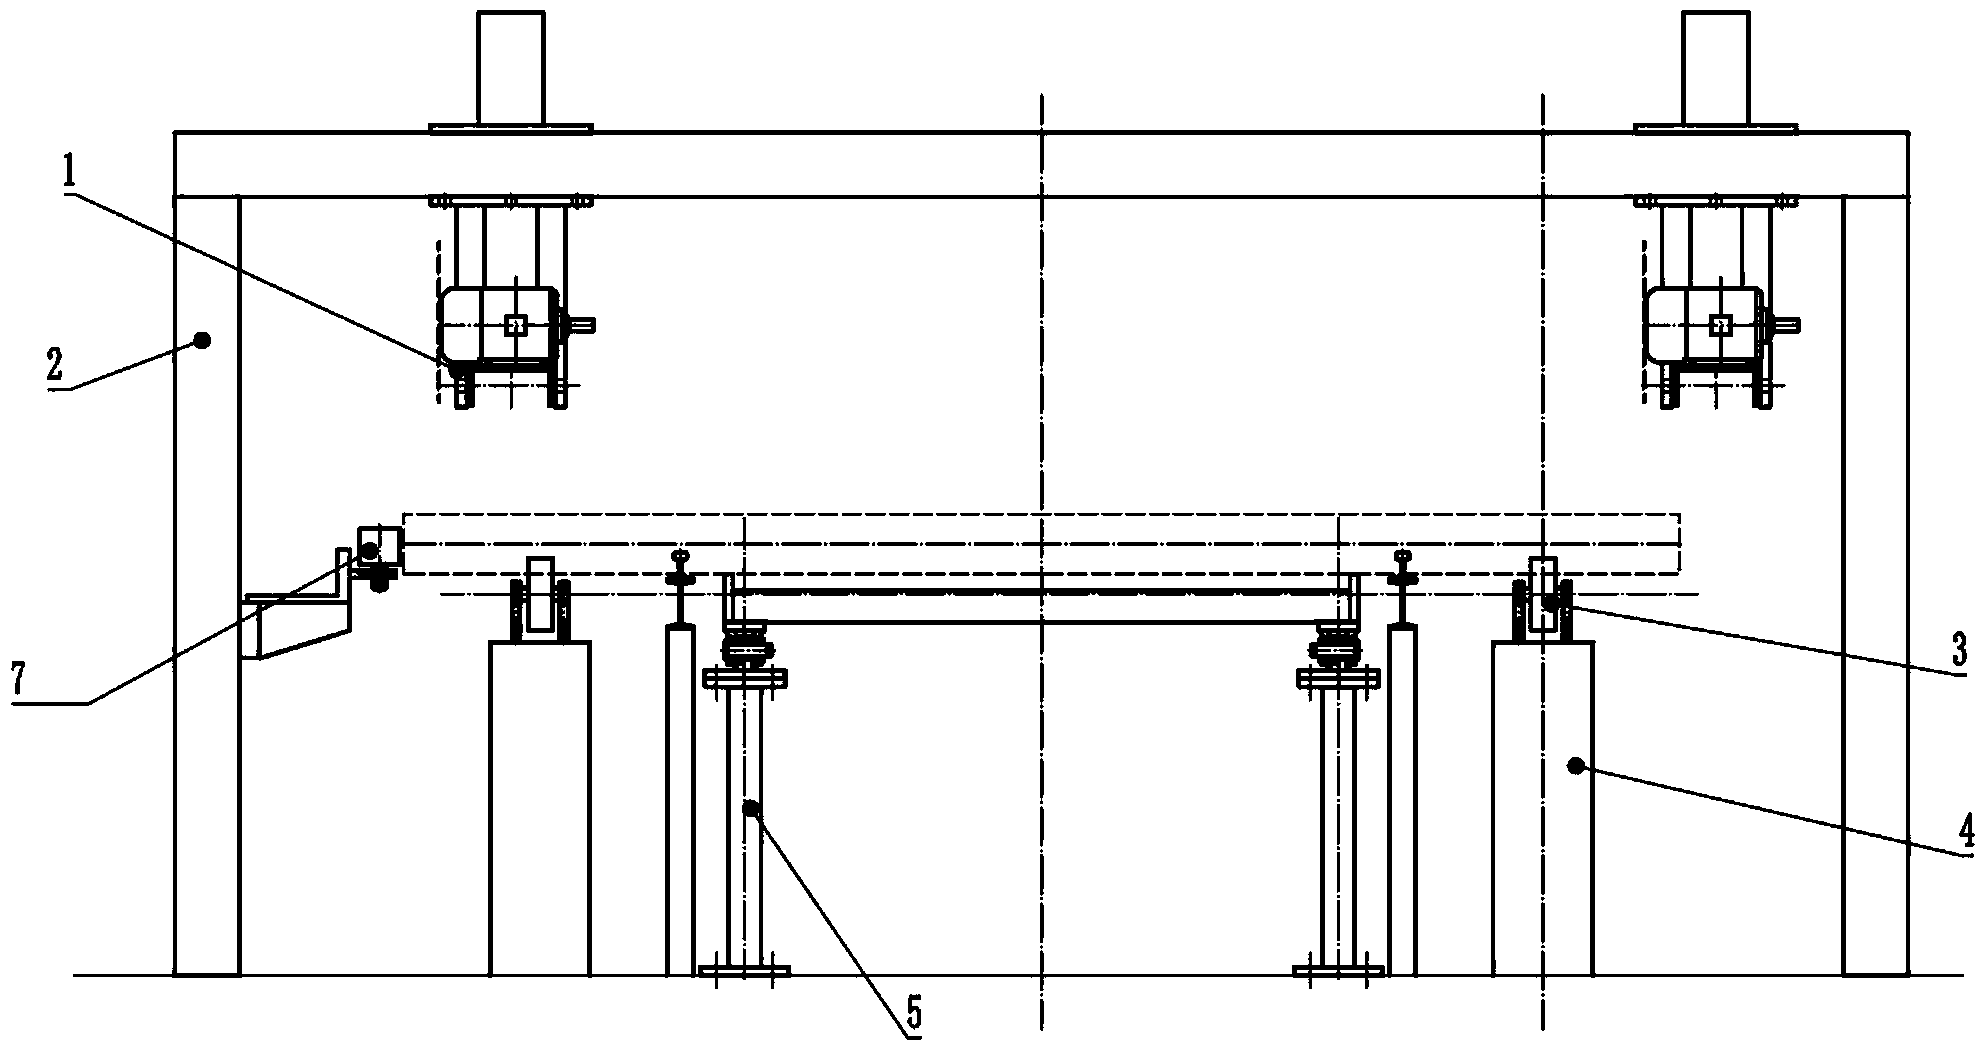 Fixed-length cutting system